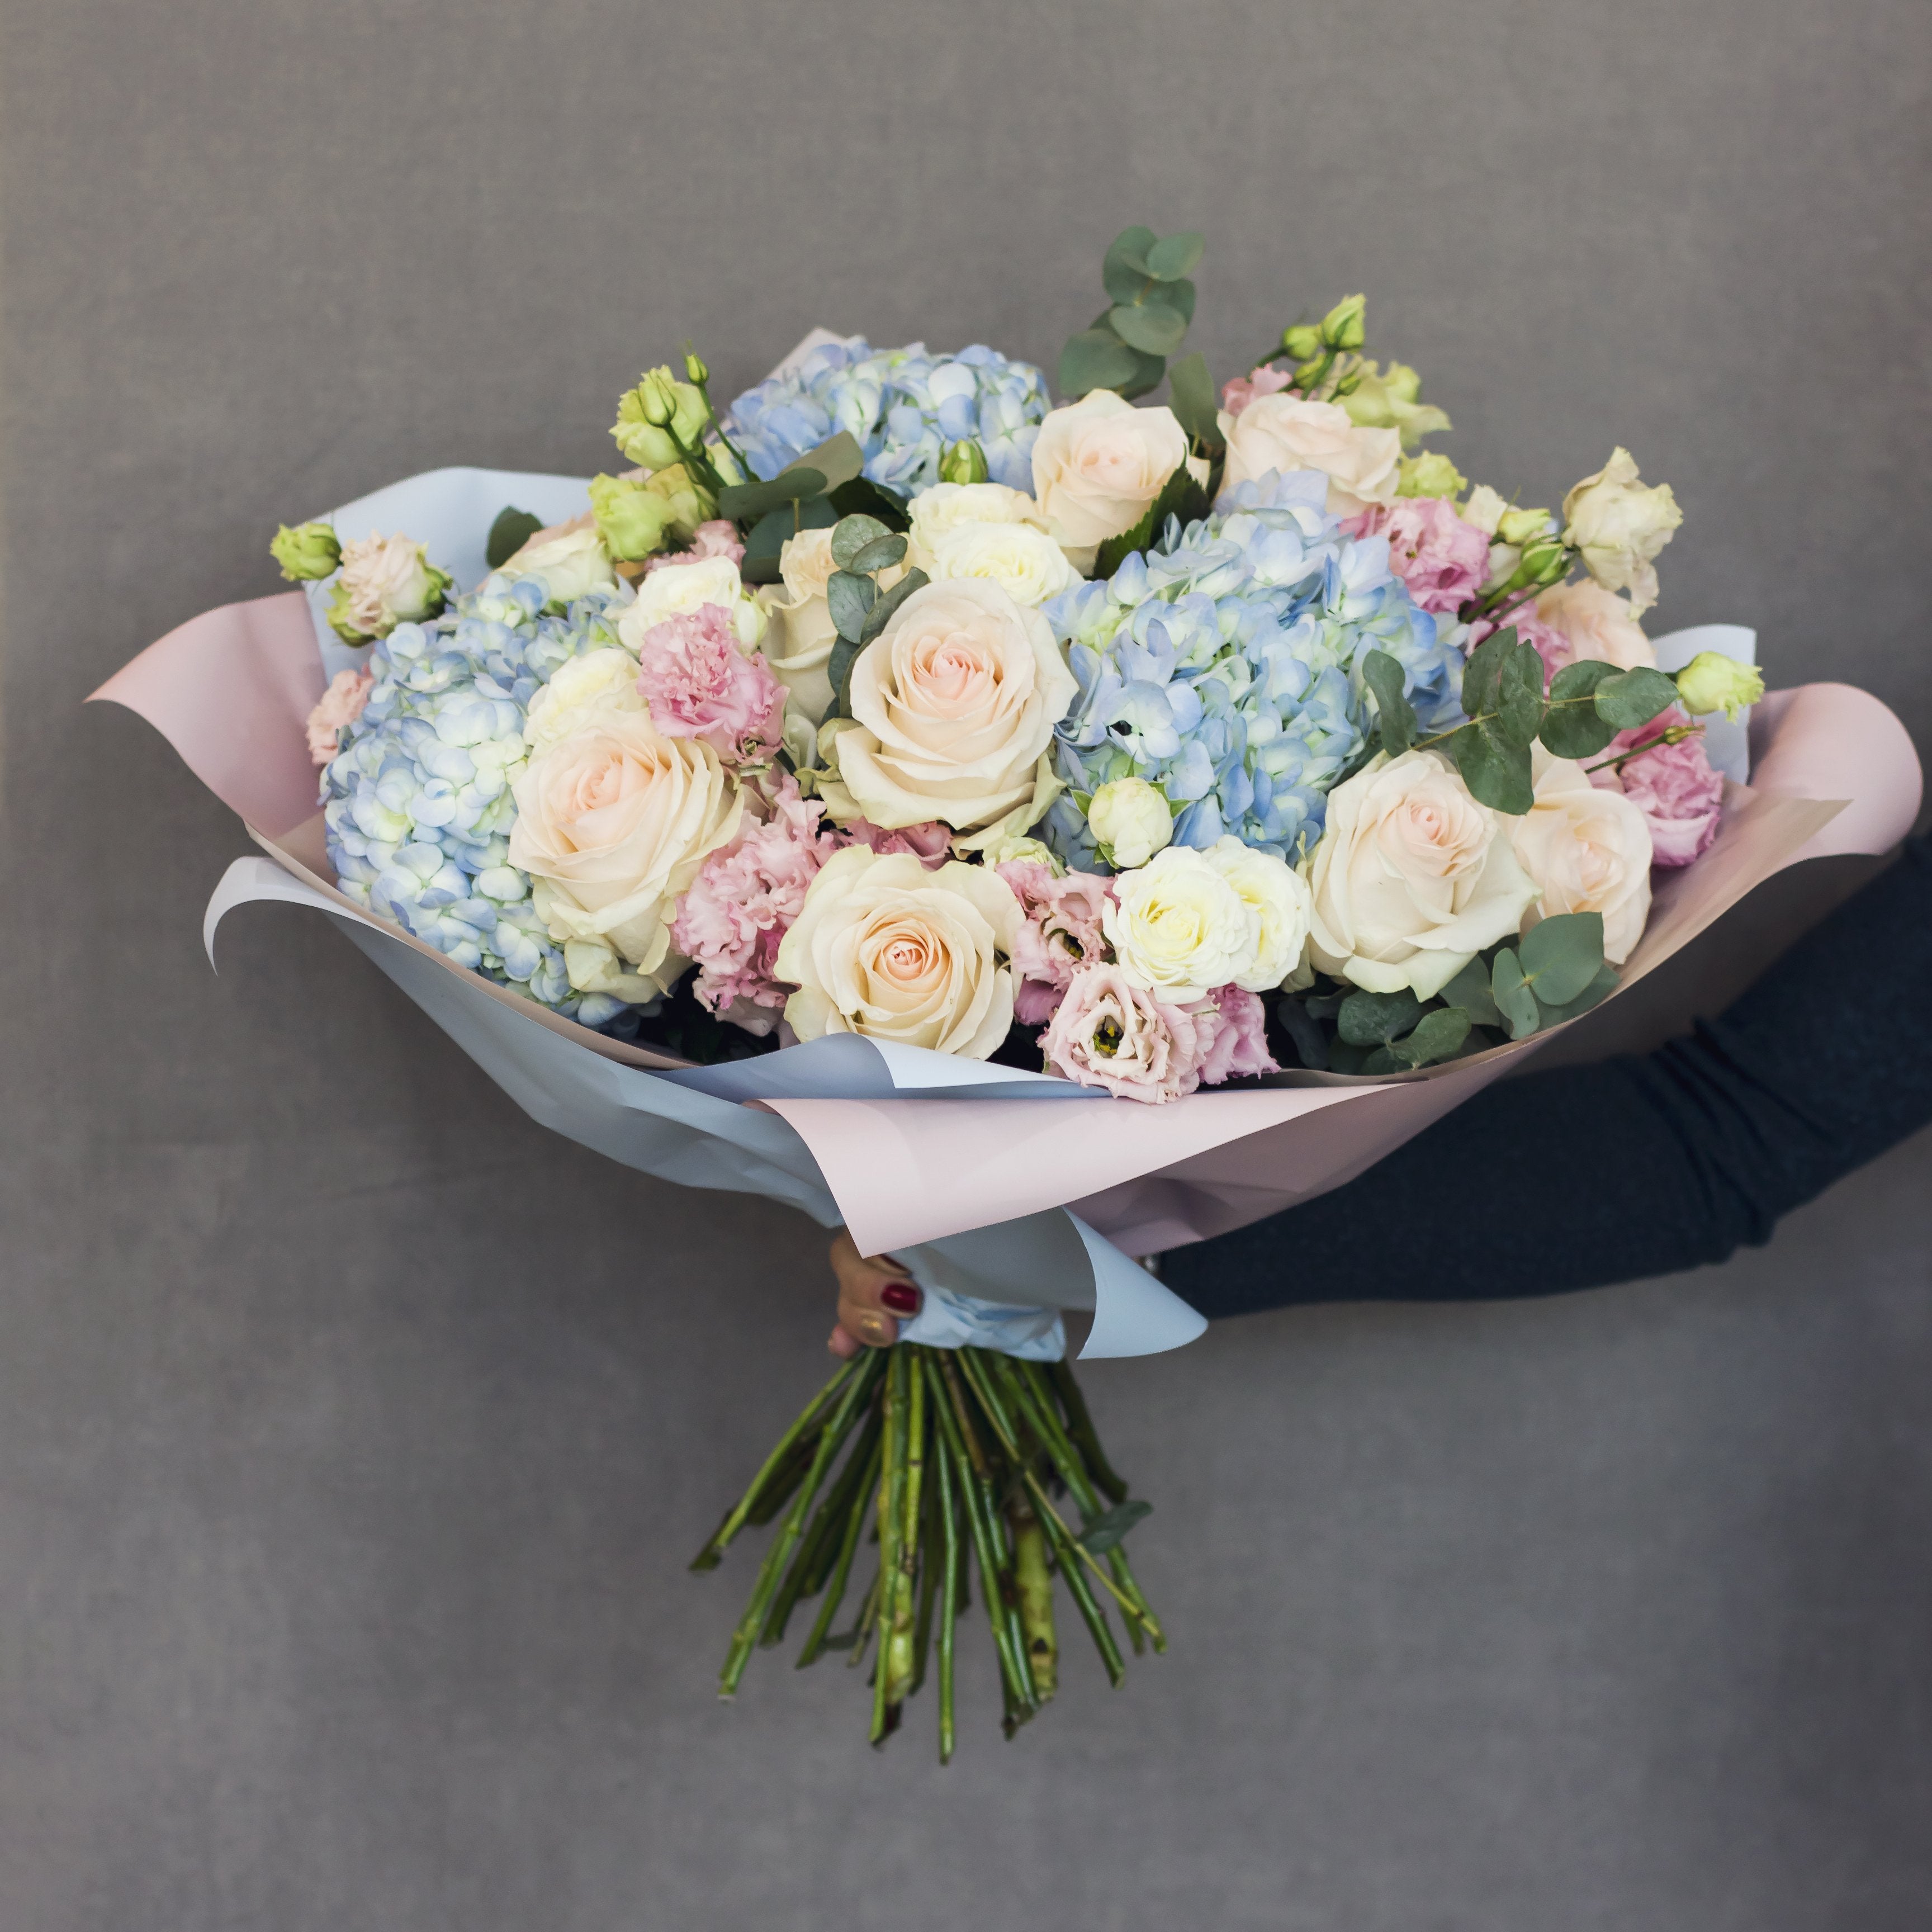 Congratulation through flower bouquet with Same Day Flower Delivery Dublin or Next Day Flowers Delivery Ireland and also Raheny Free Delivery 